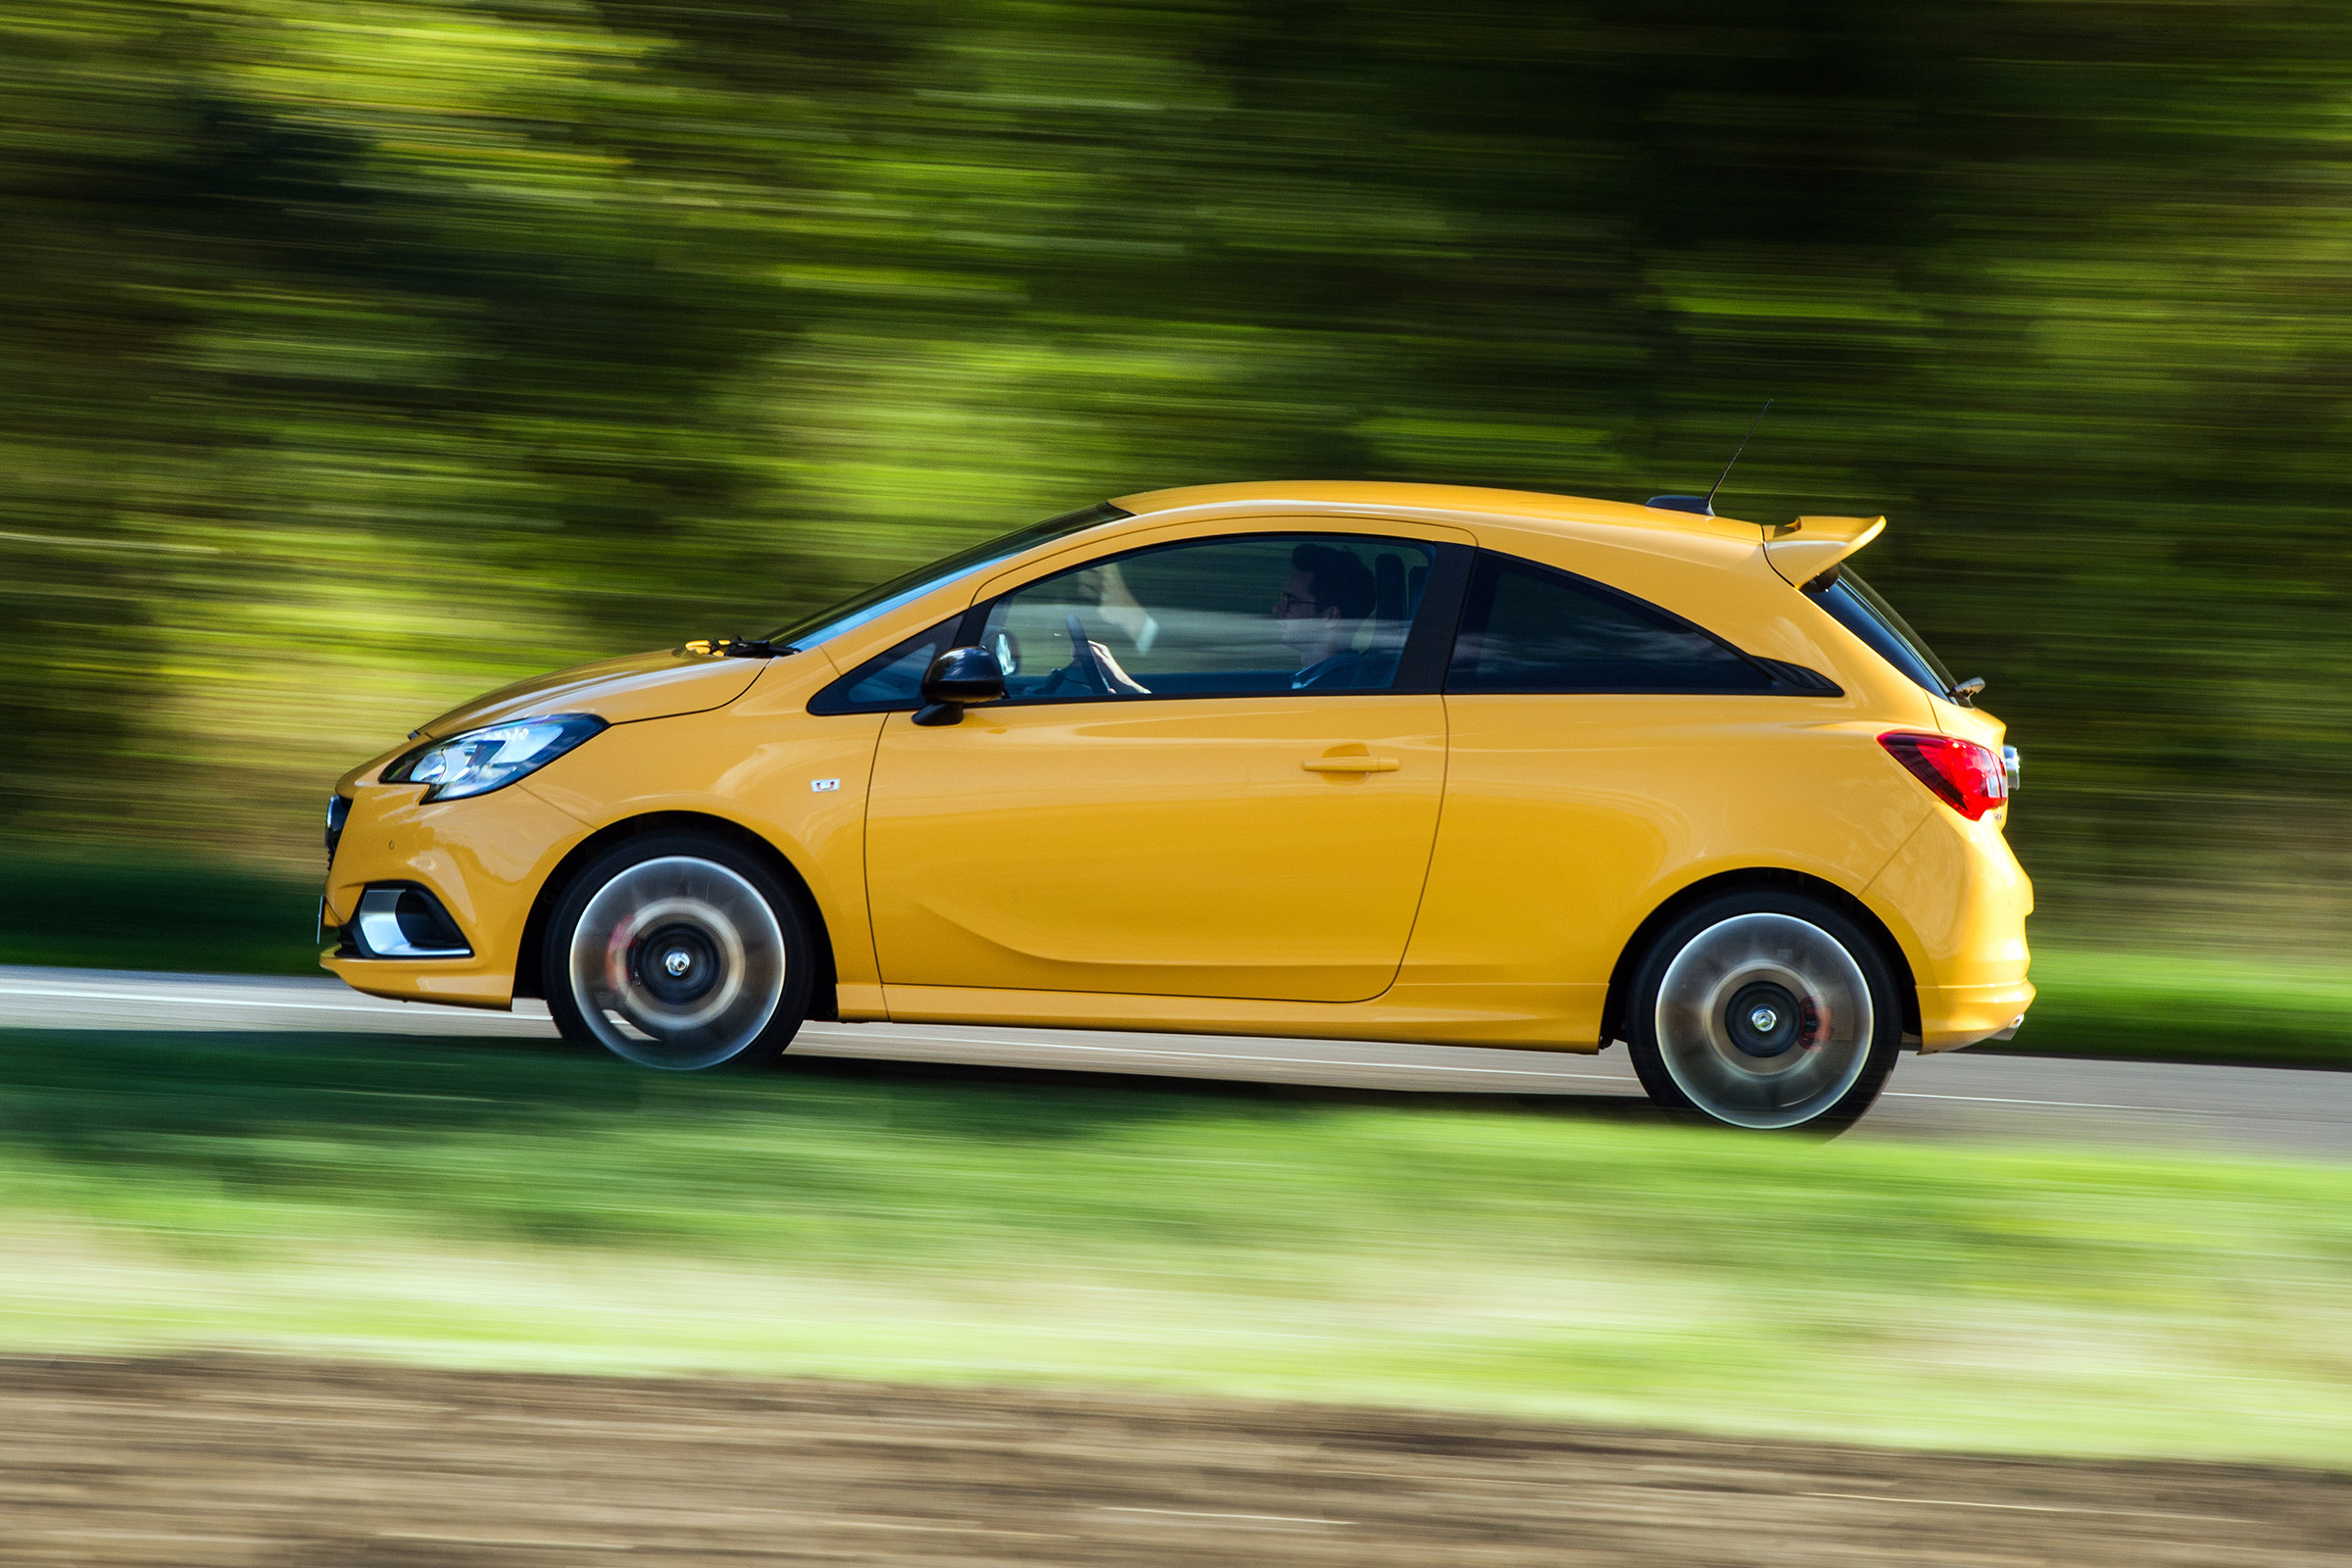 Vauxhall Corsa GSi review - too little too late?